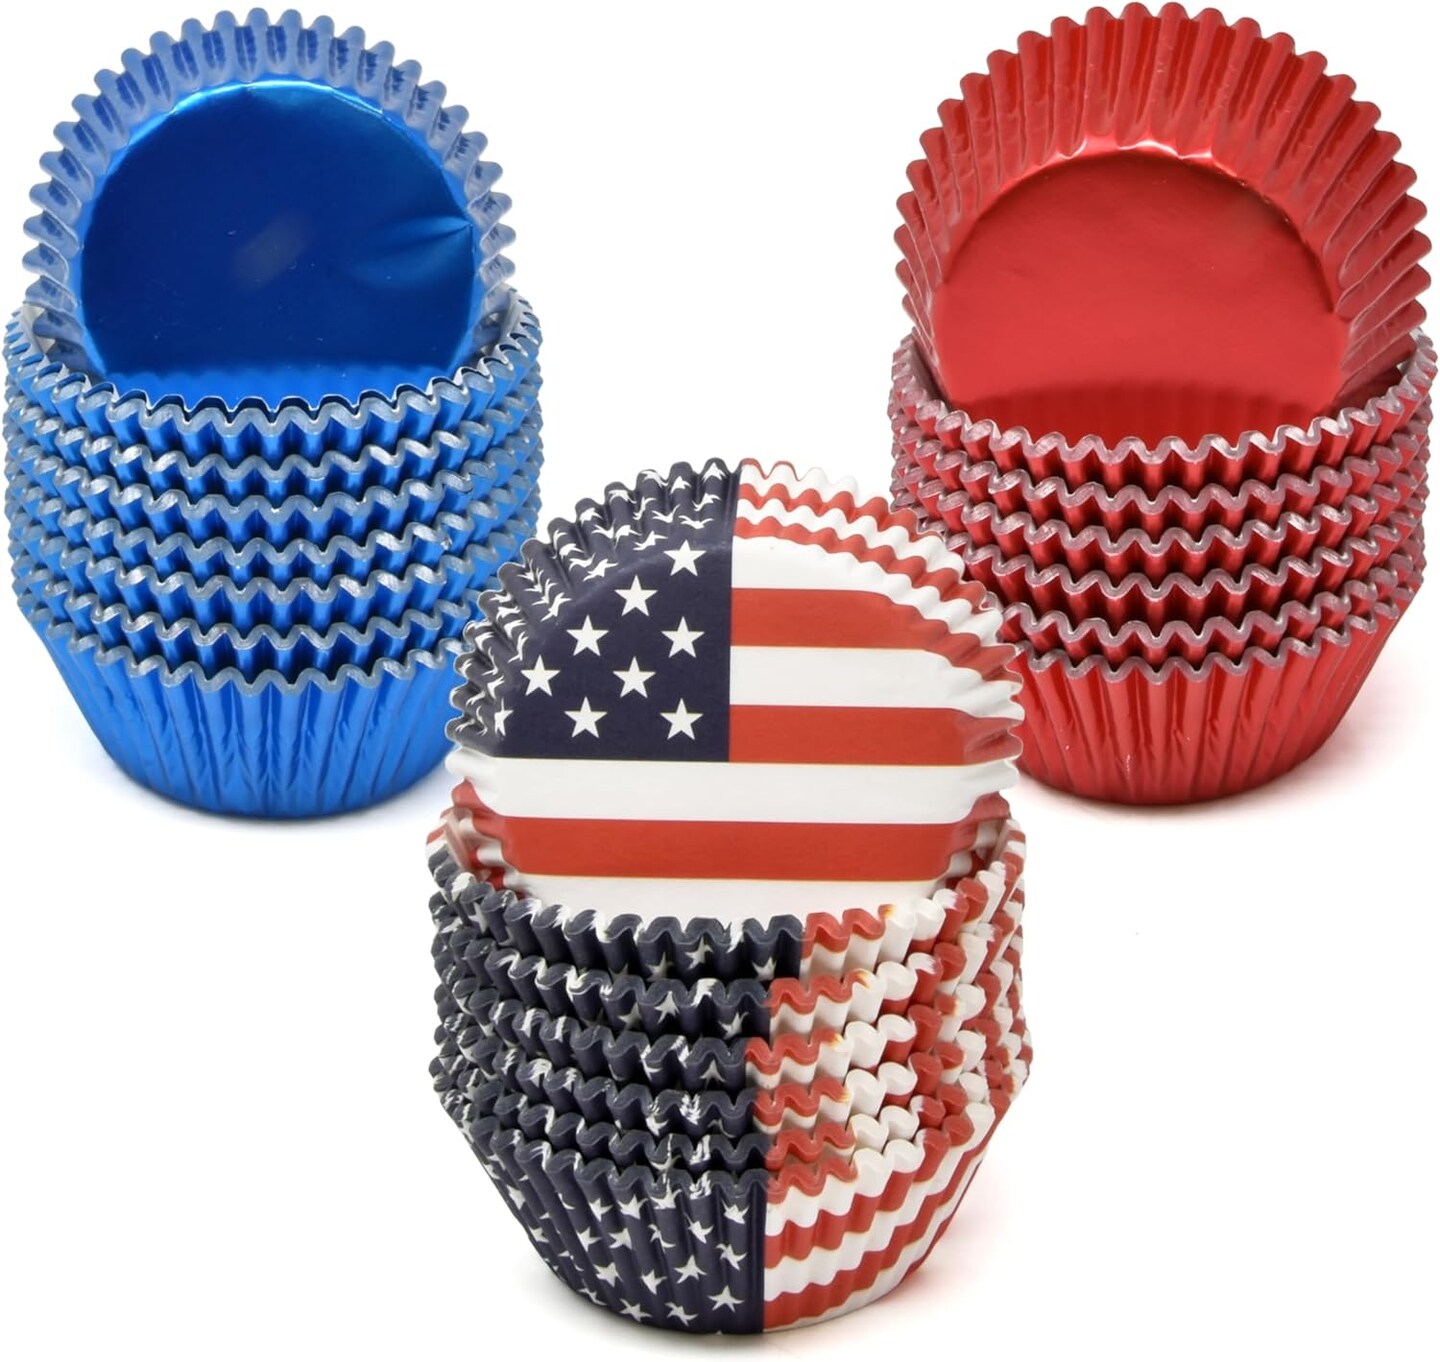 500 Pieces Patriotic Cupcake Liners Muffin Cups